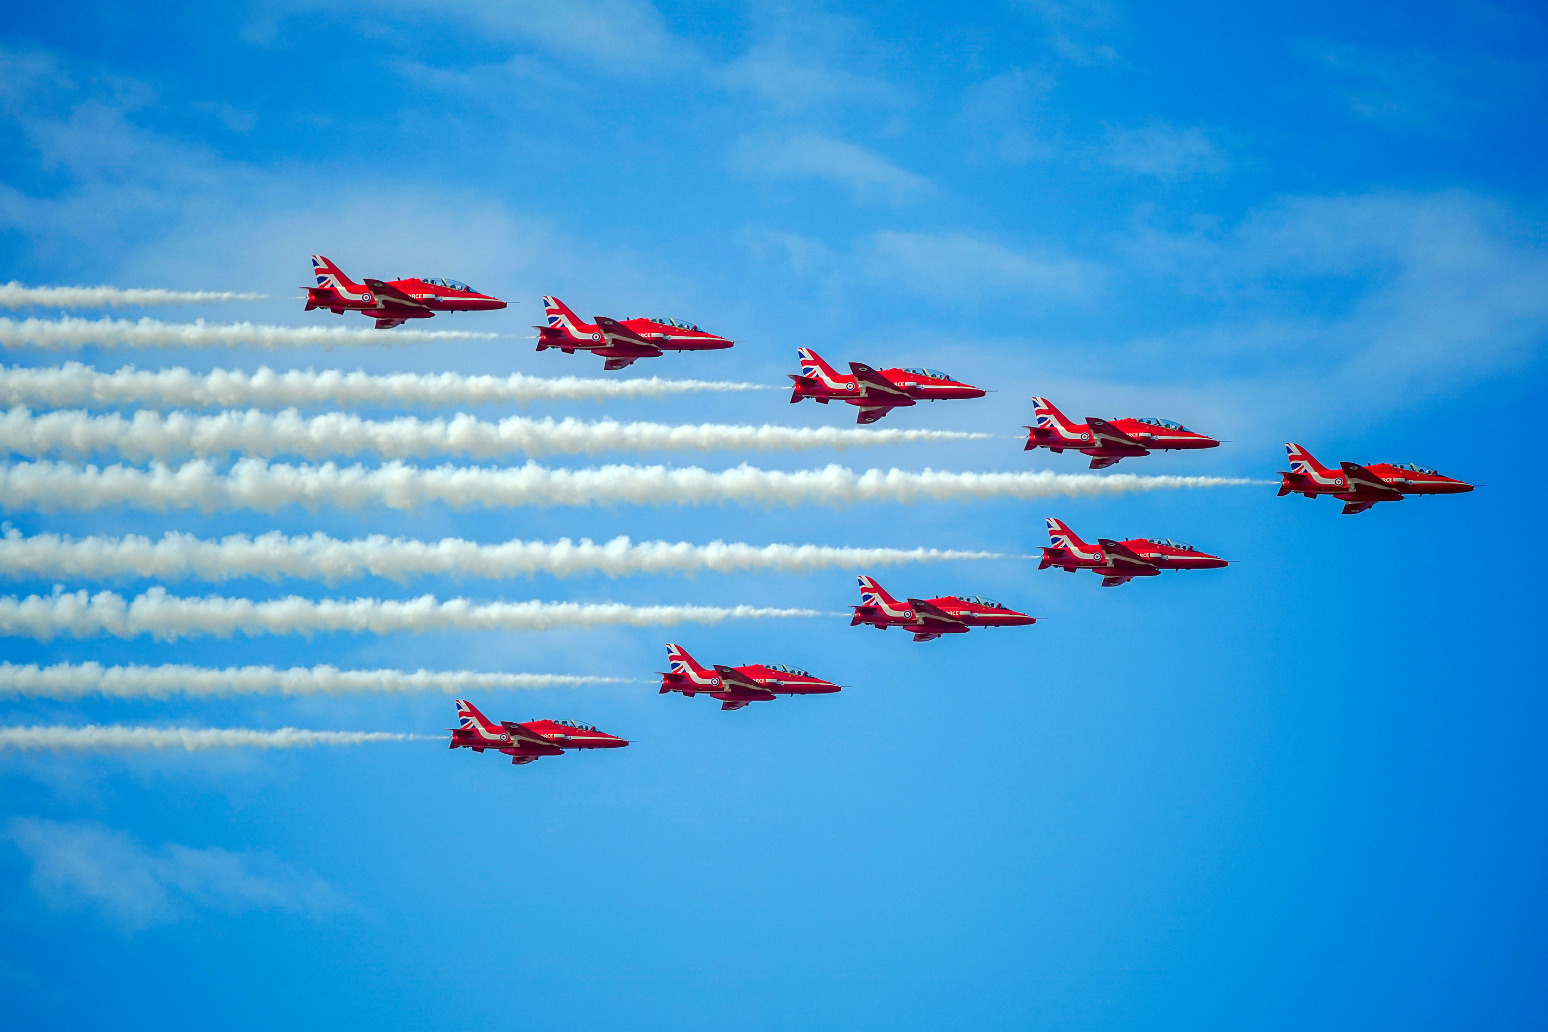 Sexual harassment and bullying widespread and normalised in Red Arrows 